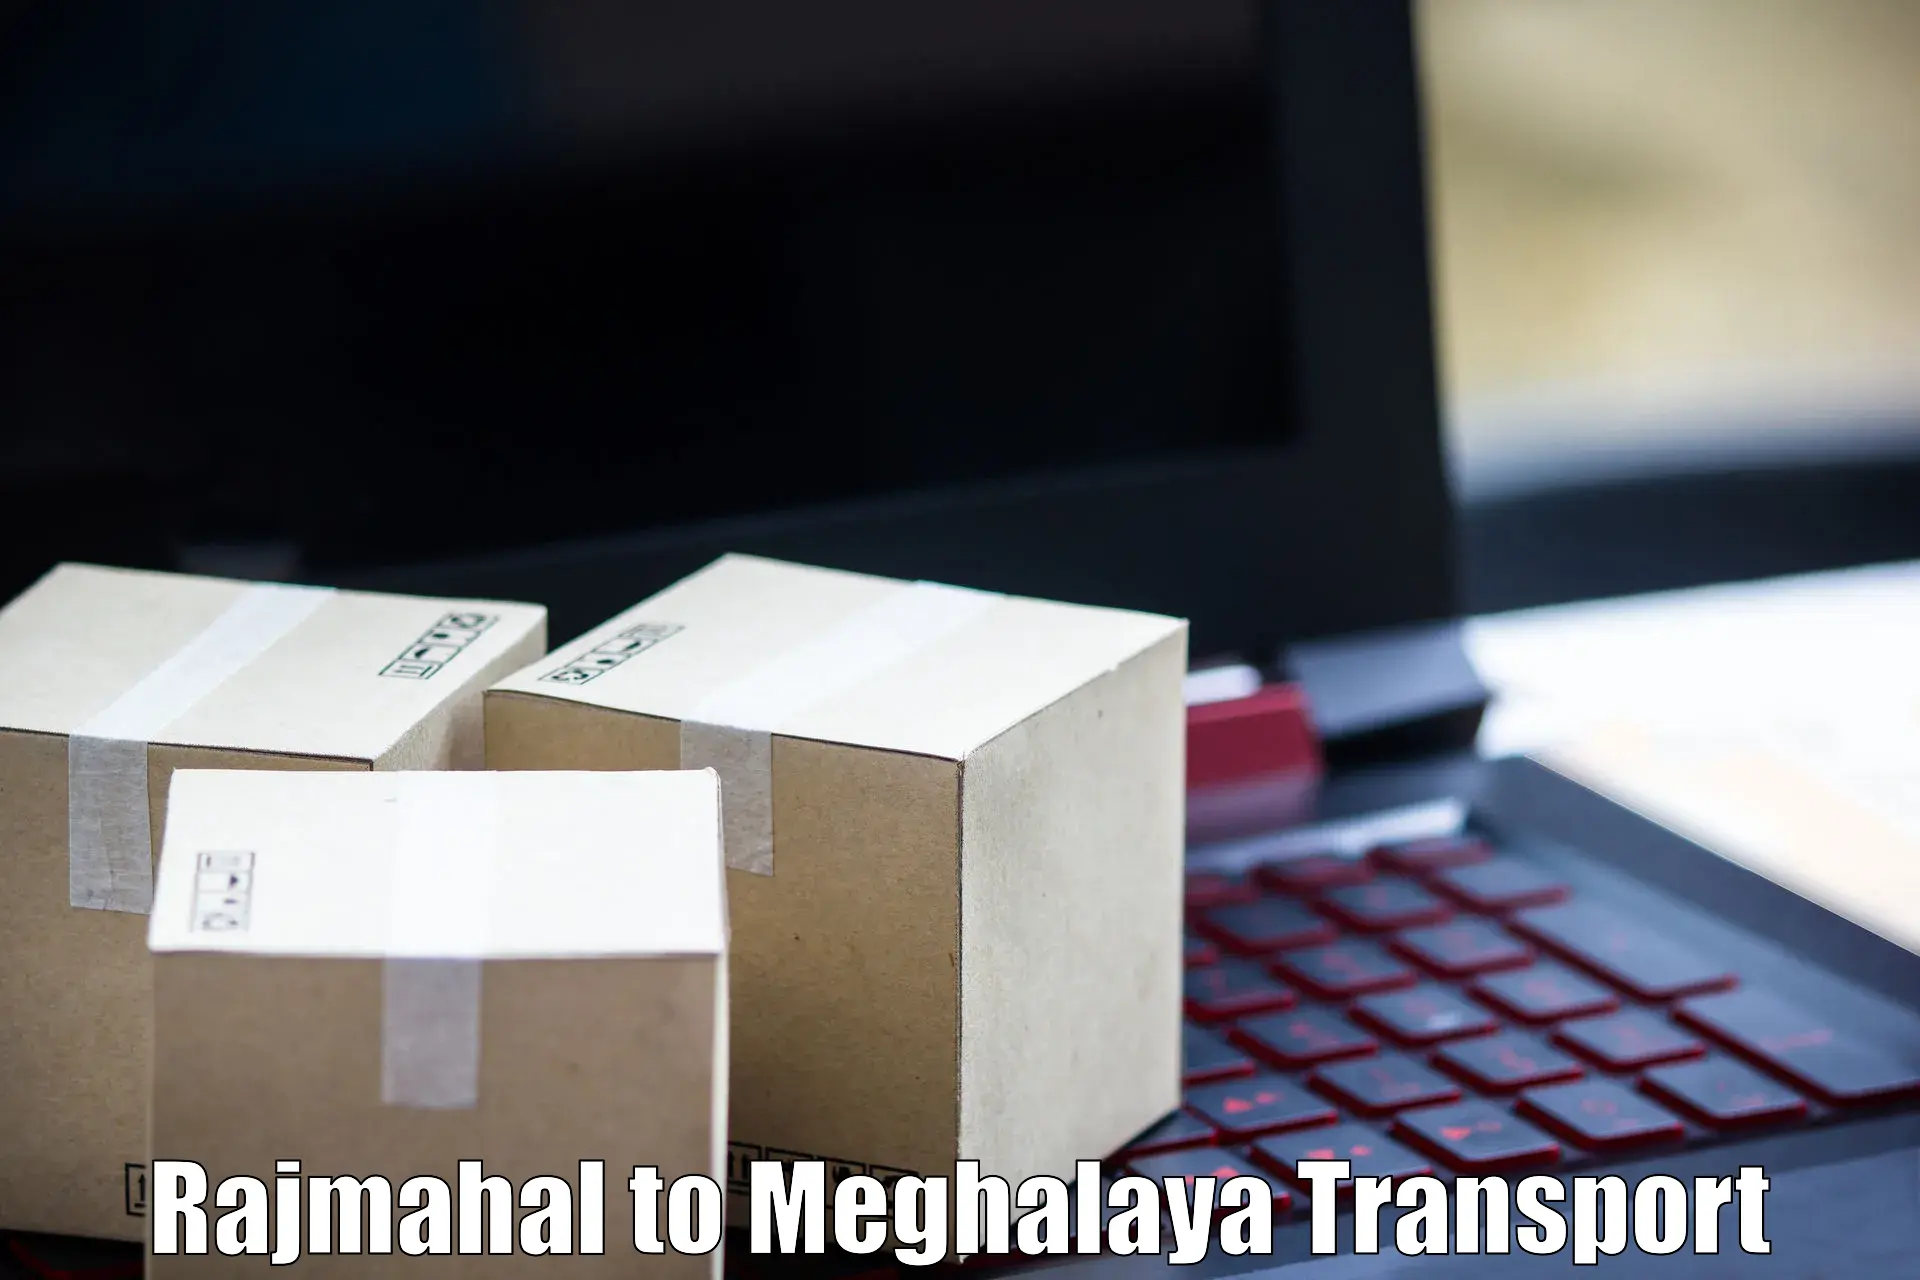 Air cargo transport services in Rajmahal to Tura